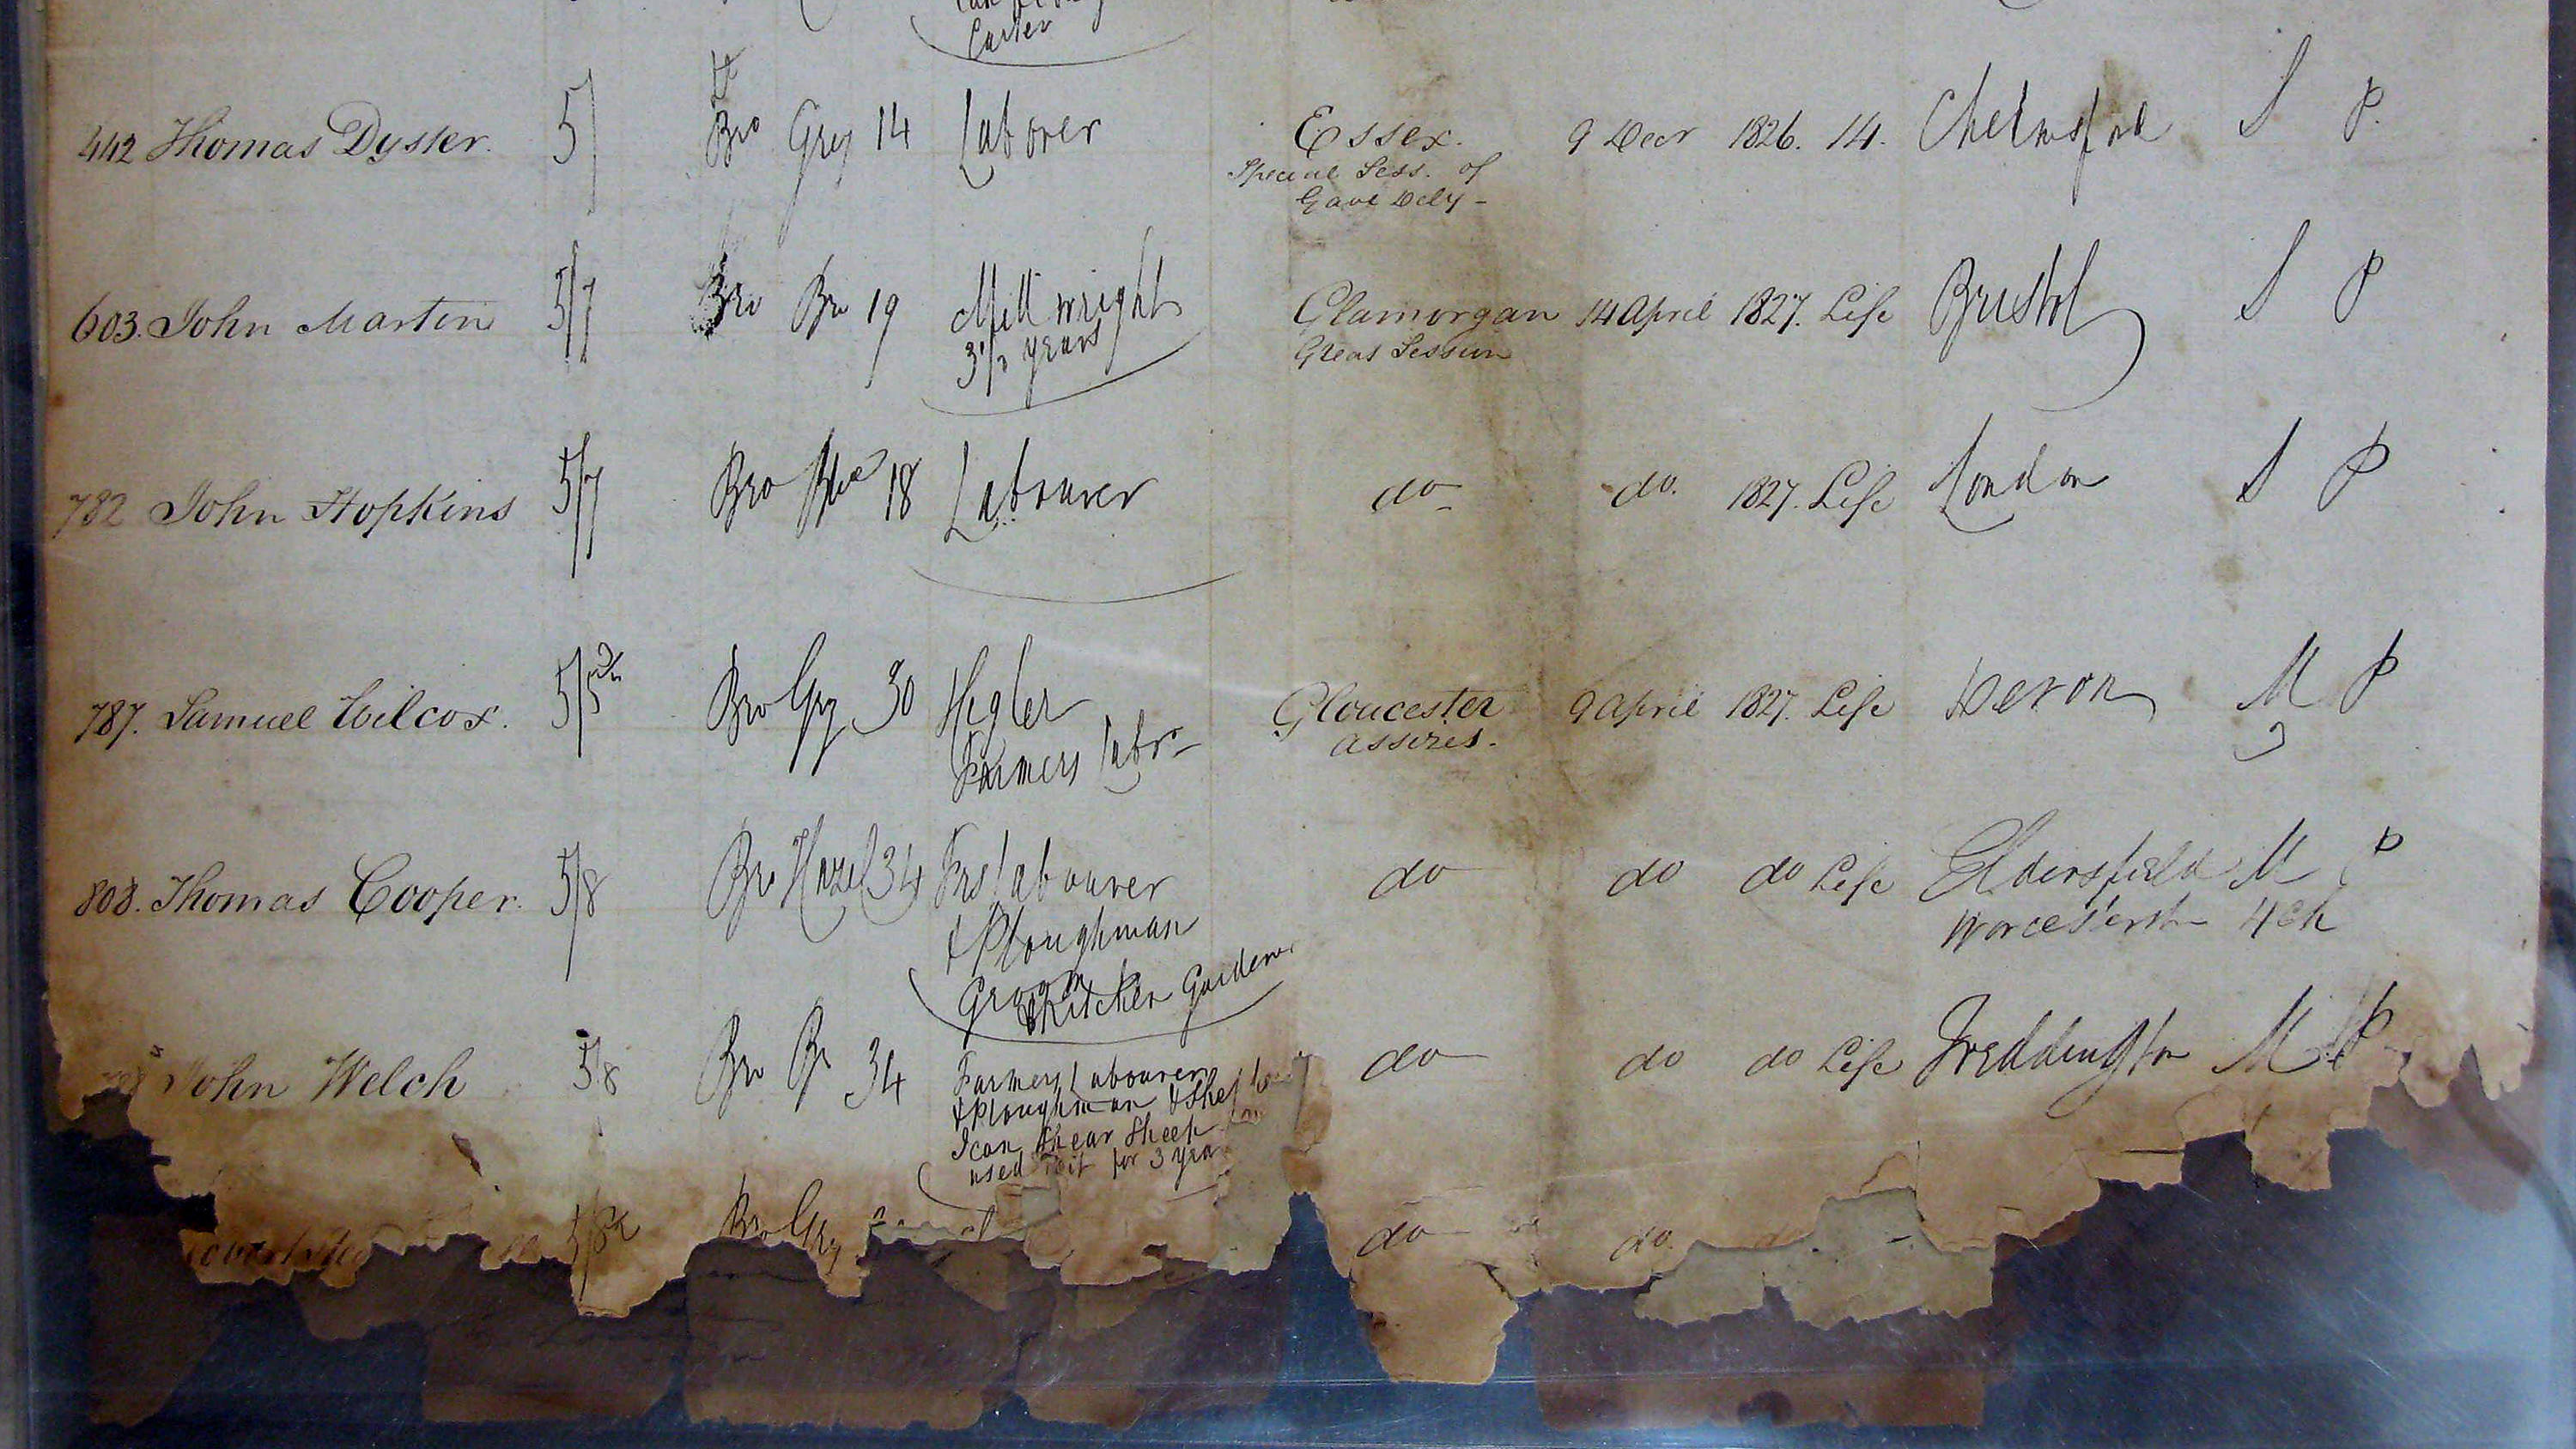 Excerpt from ledgers held as part of Brickendon Estate’s archives mentioning John Welch.